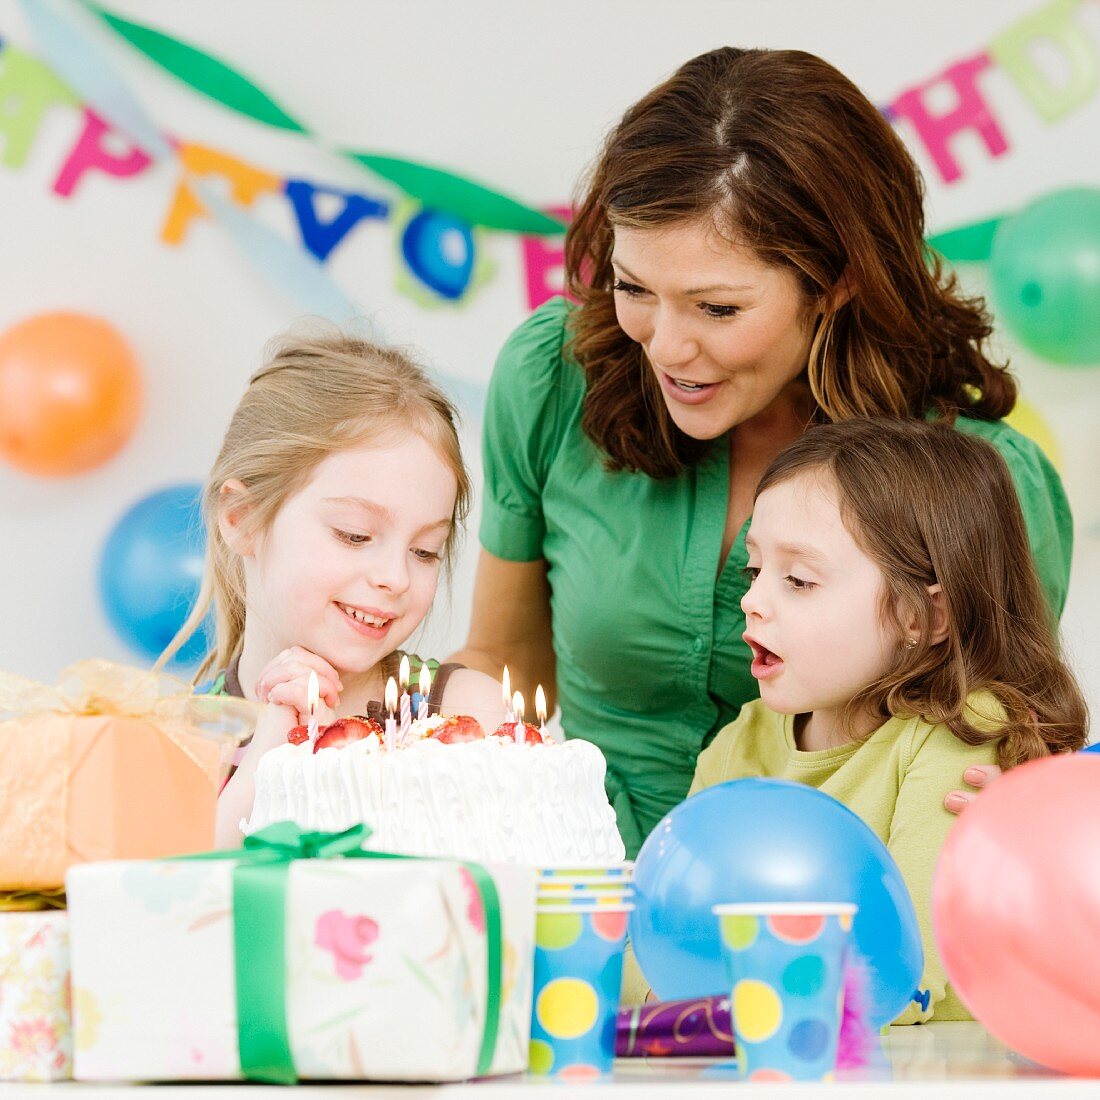 Girl celebrating birthday with mother and sister